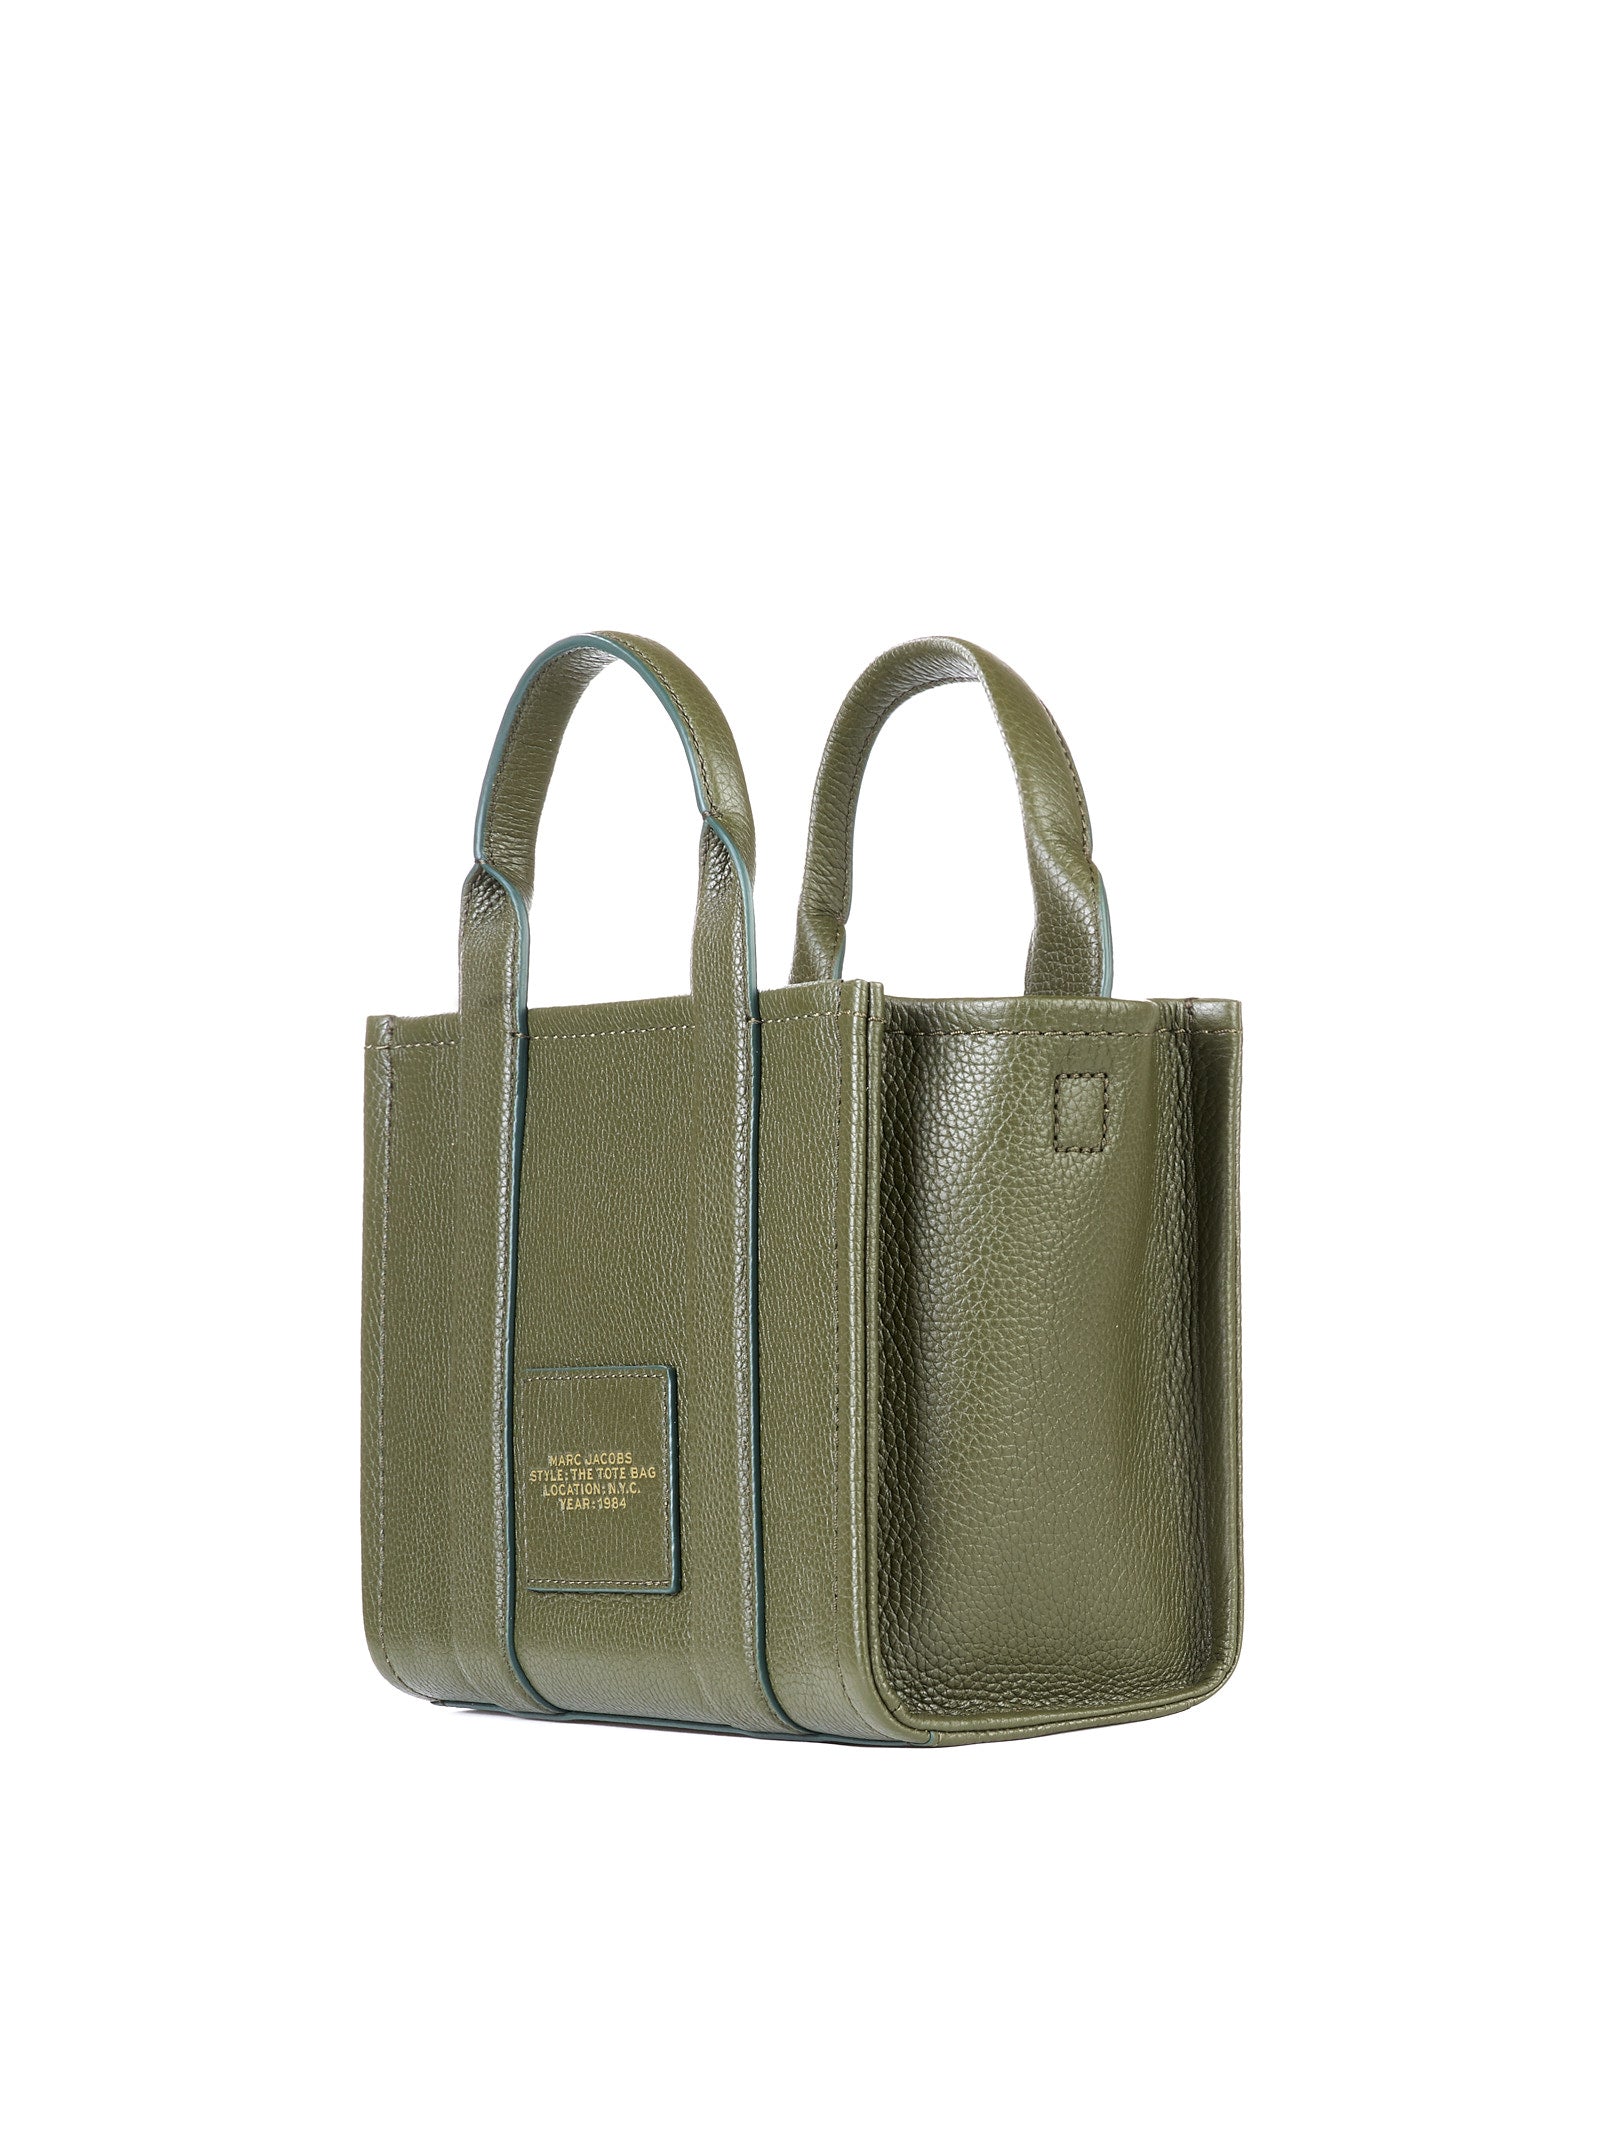 Borsa MARC JACOBS Small tote
Forest